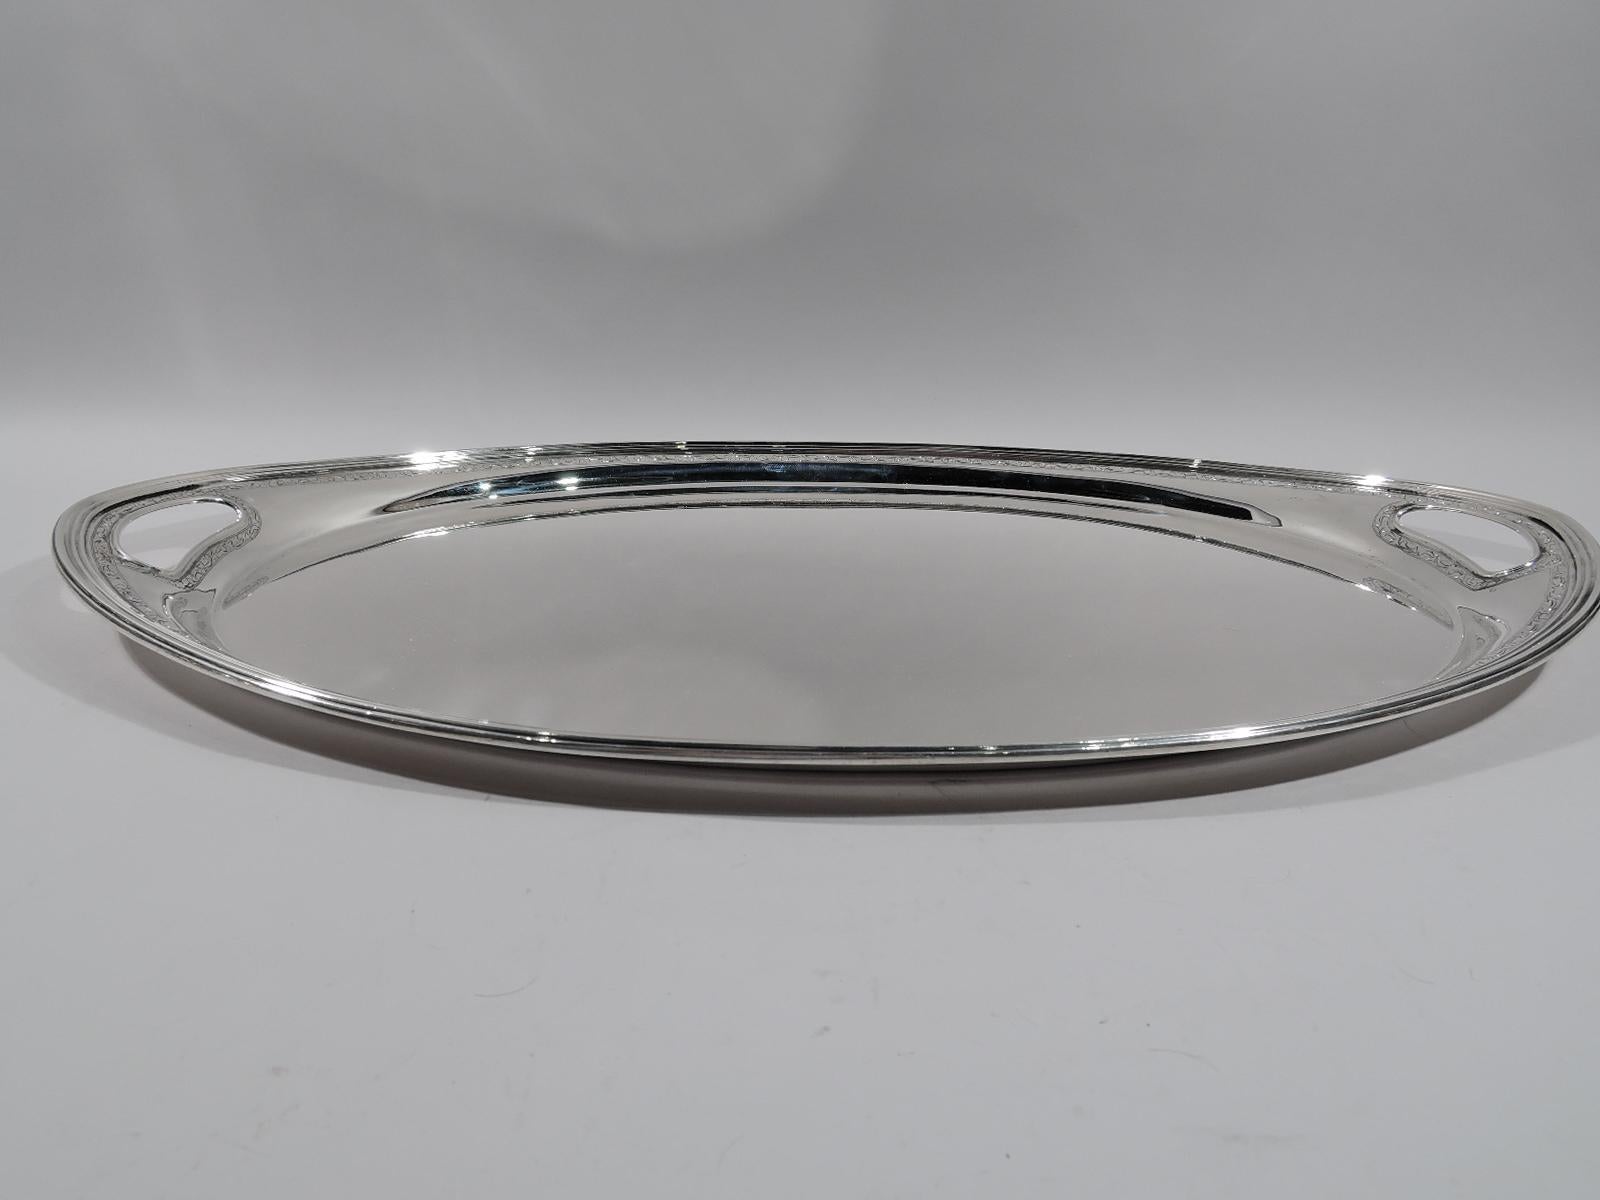 Large and heavy sterling silver tea tray. Made by Tiffany & Co. in New York, circa 1911. Oval well with tapering shoulder and reeded rim. Pointed ends with cutout oval handles. Discreet scrollwork engraved between pointille borders. Fully marked